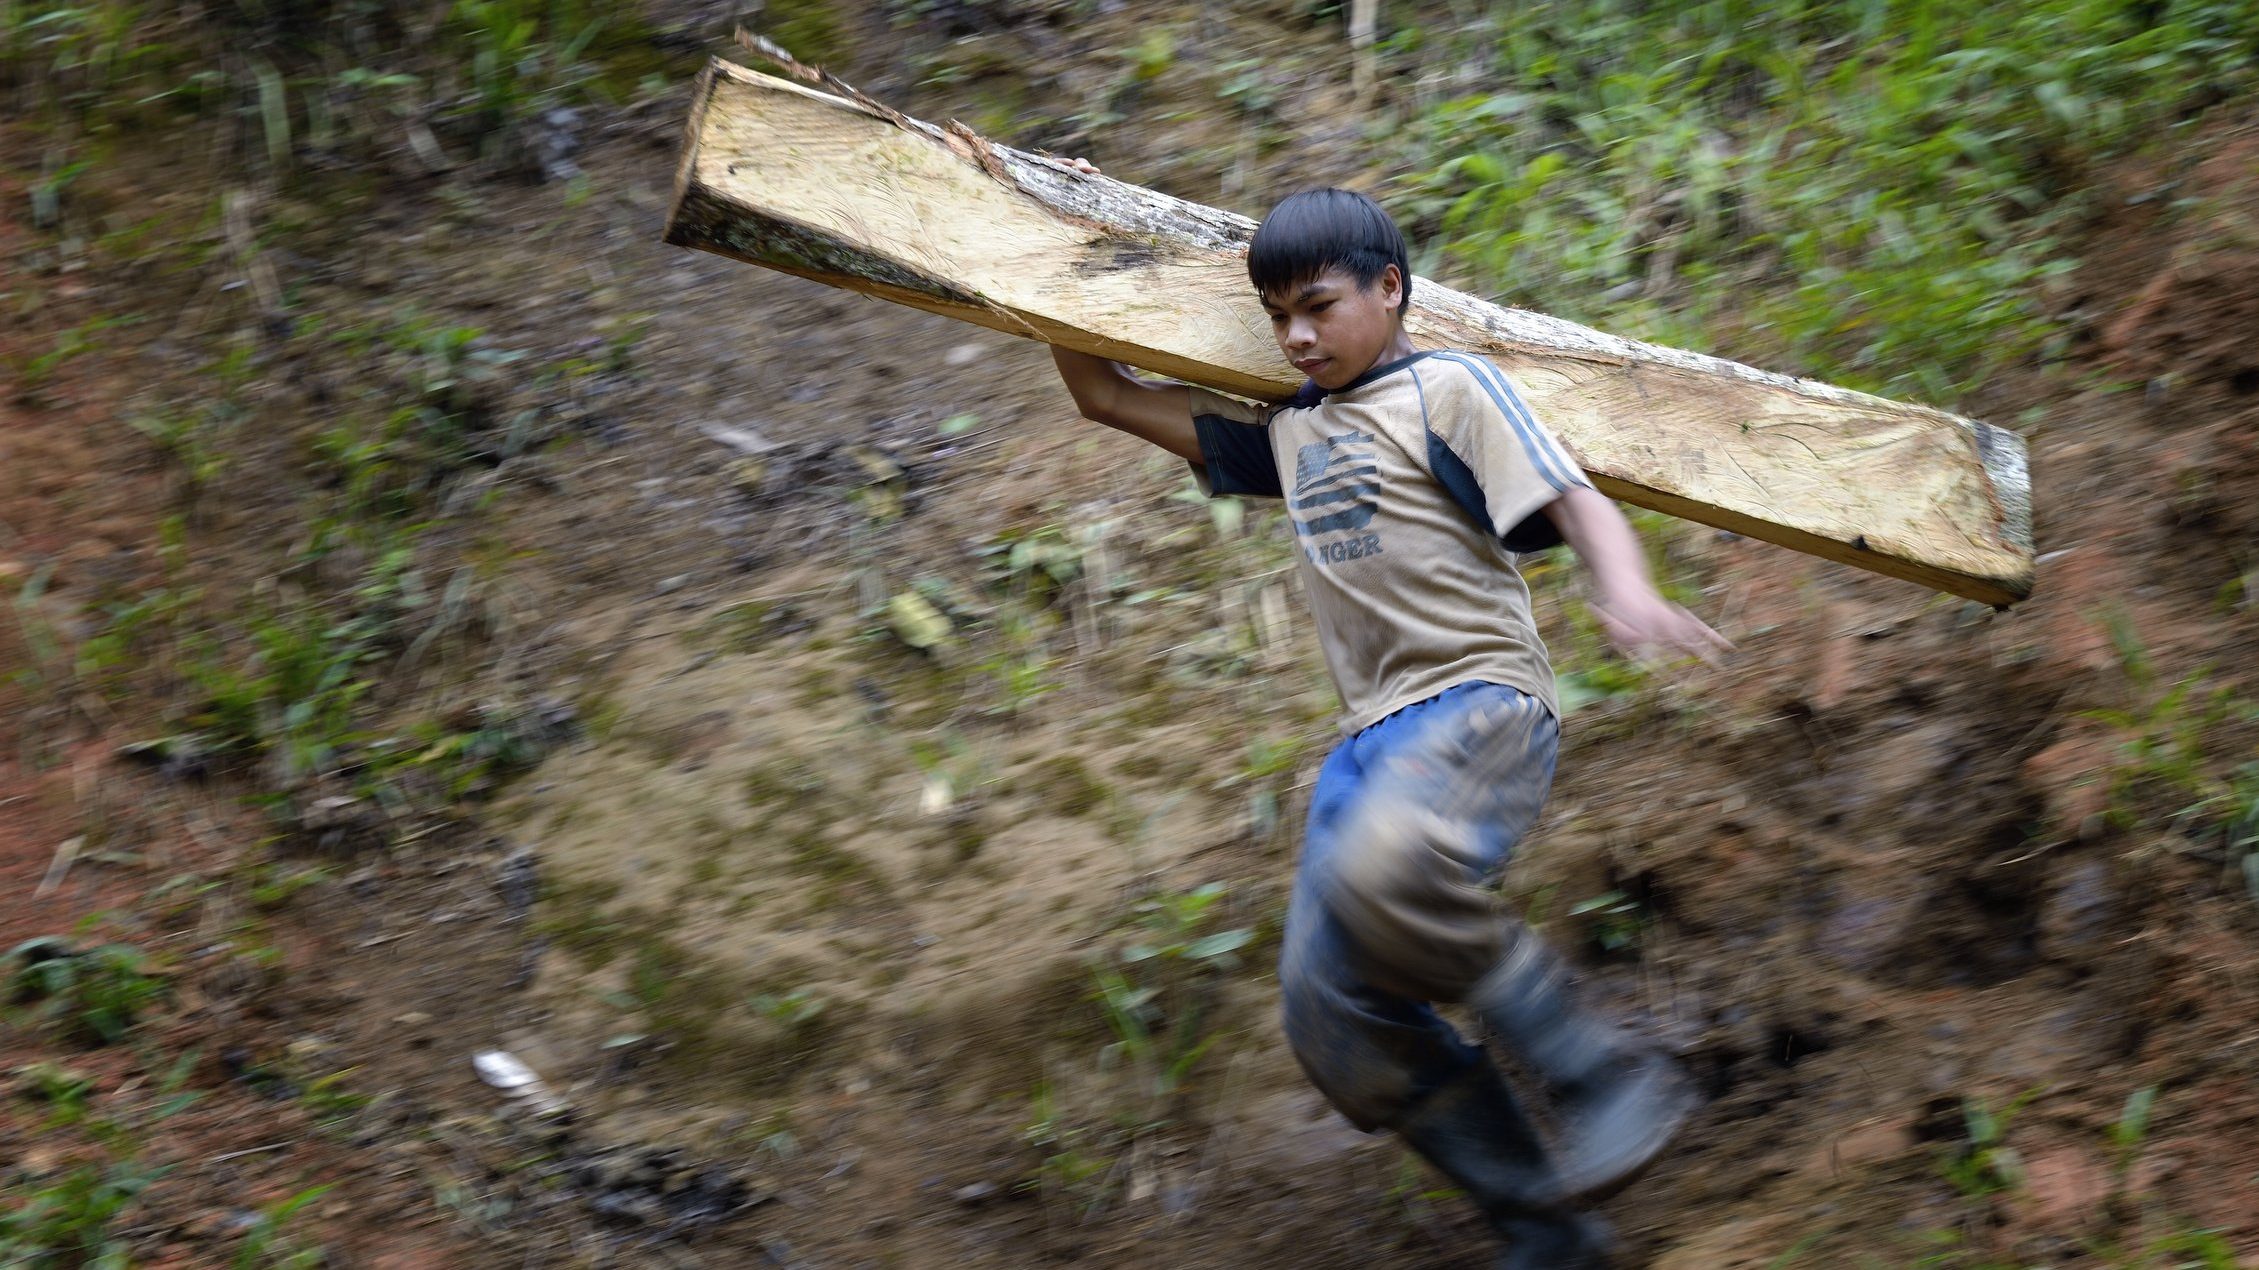 Poverty driving children into forced labor must be tackled, pope says